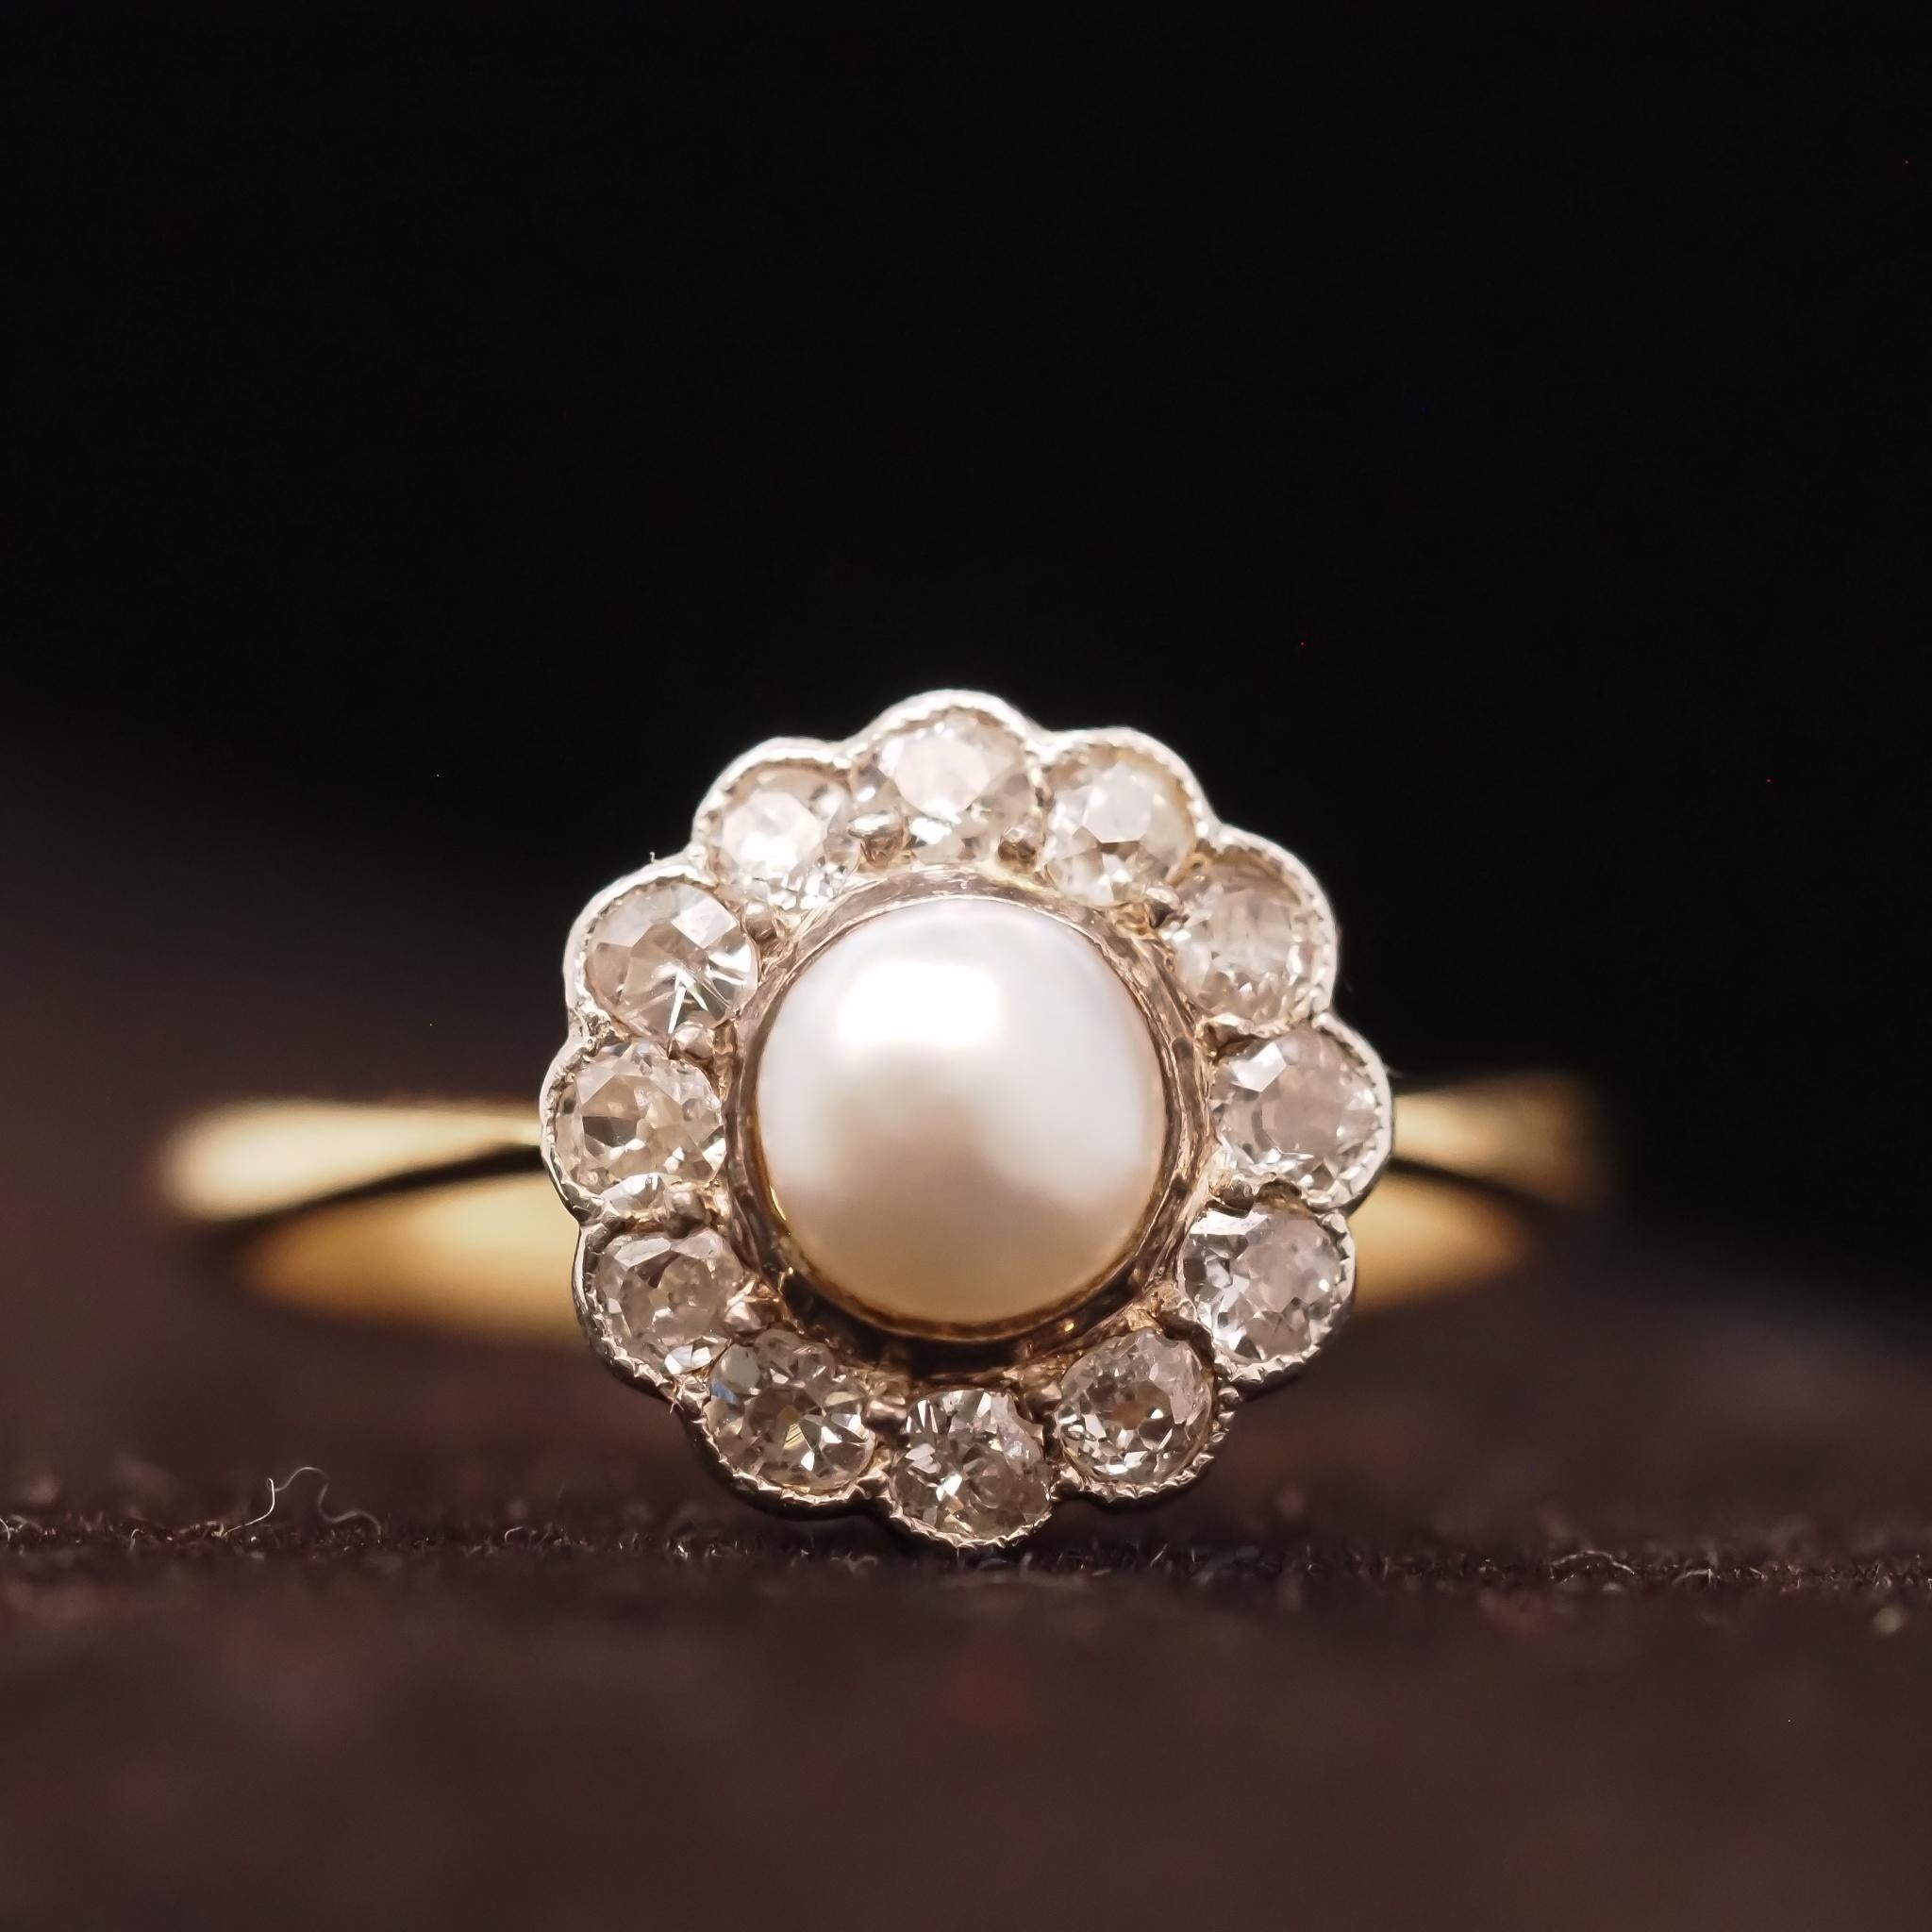 Circa 1900s Edwardian 14K Yellow Gold Pearl and Old European Diamond Ring For Sale 4